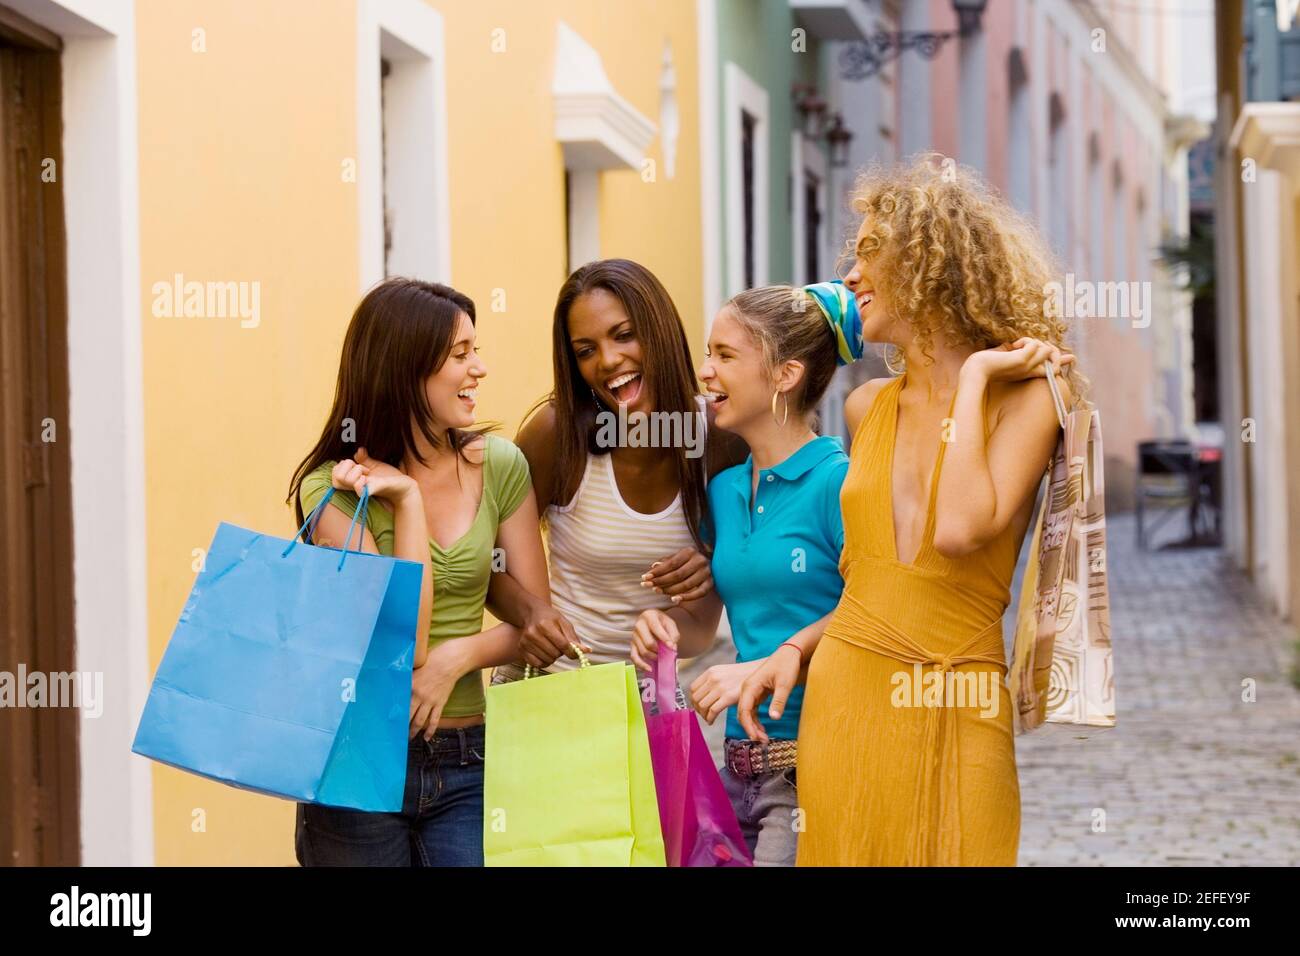 Four teenage girls holding shopping bags and laughing Stock Photo